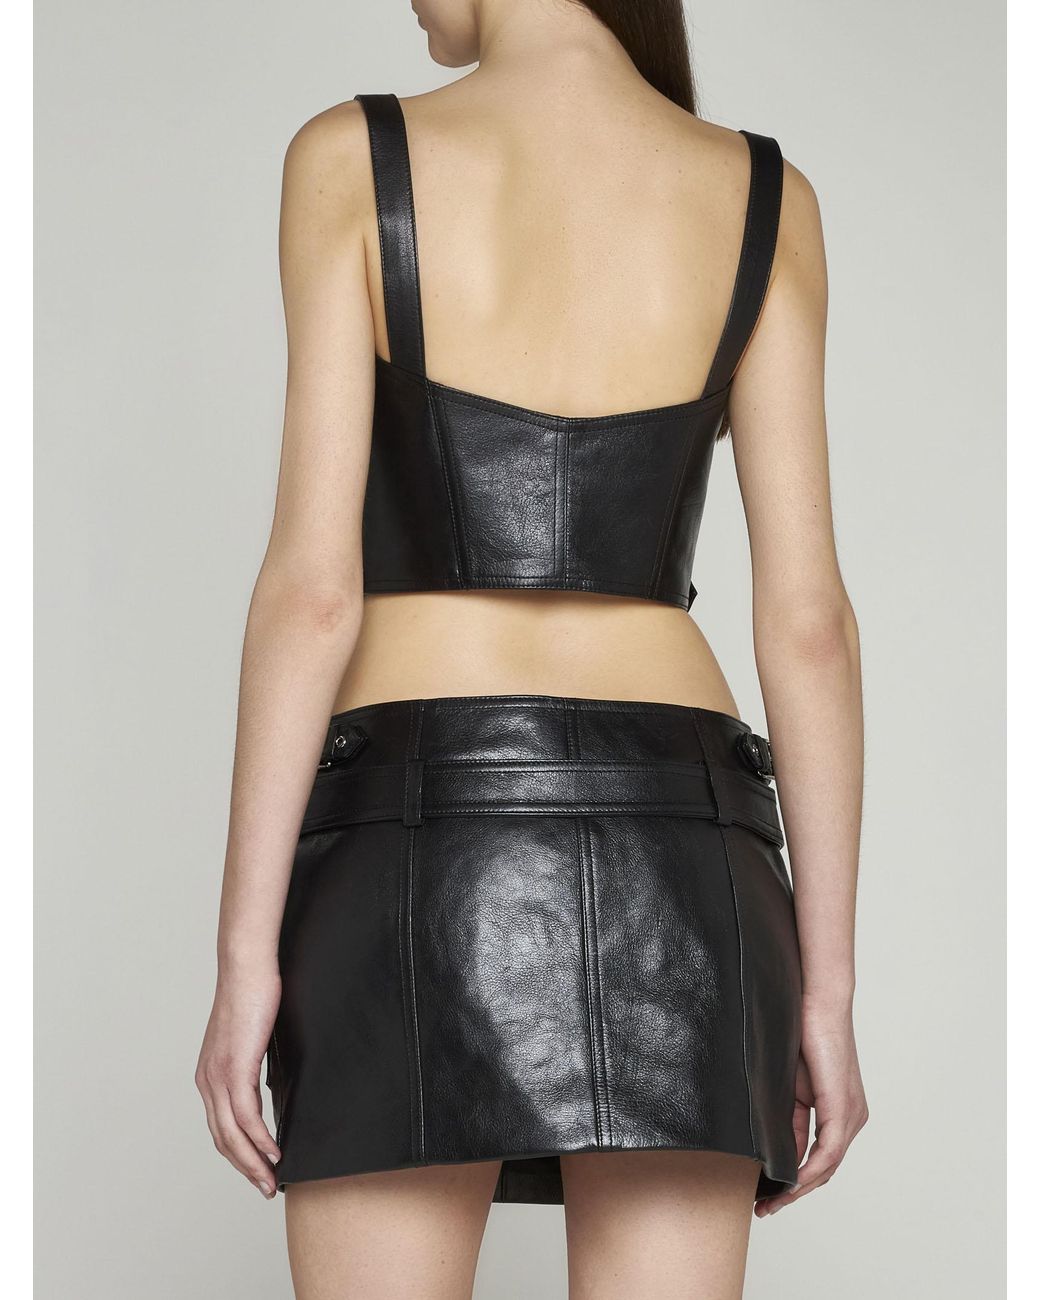 Versace Leather Bustier Top in Black | Lyst